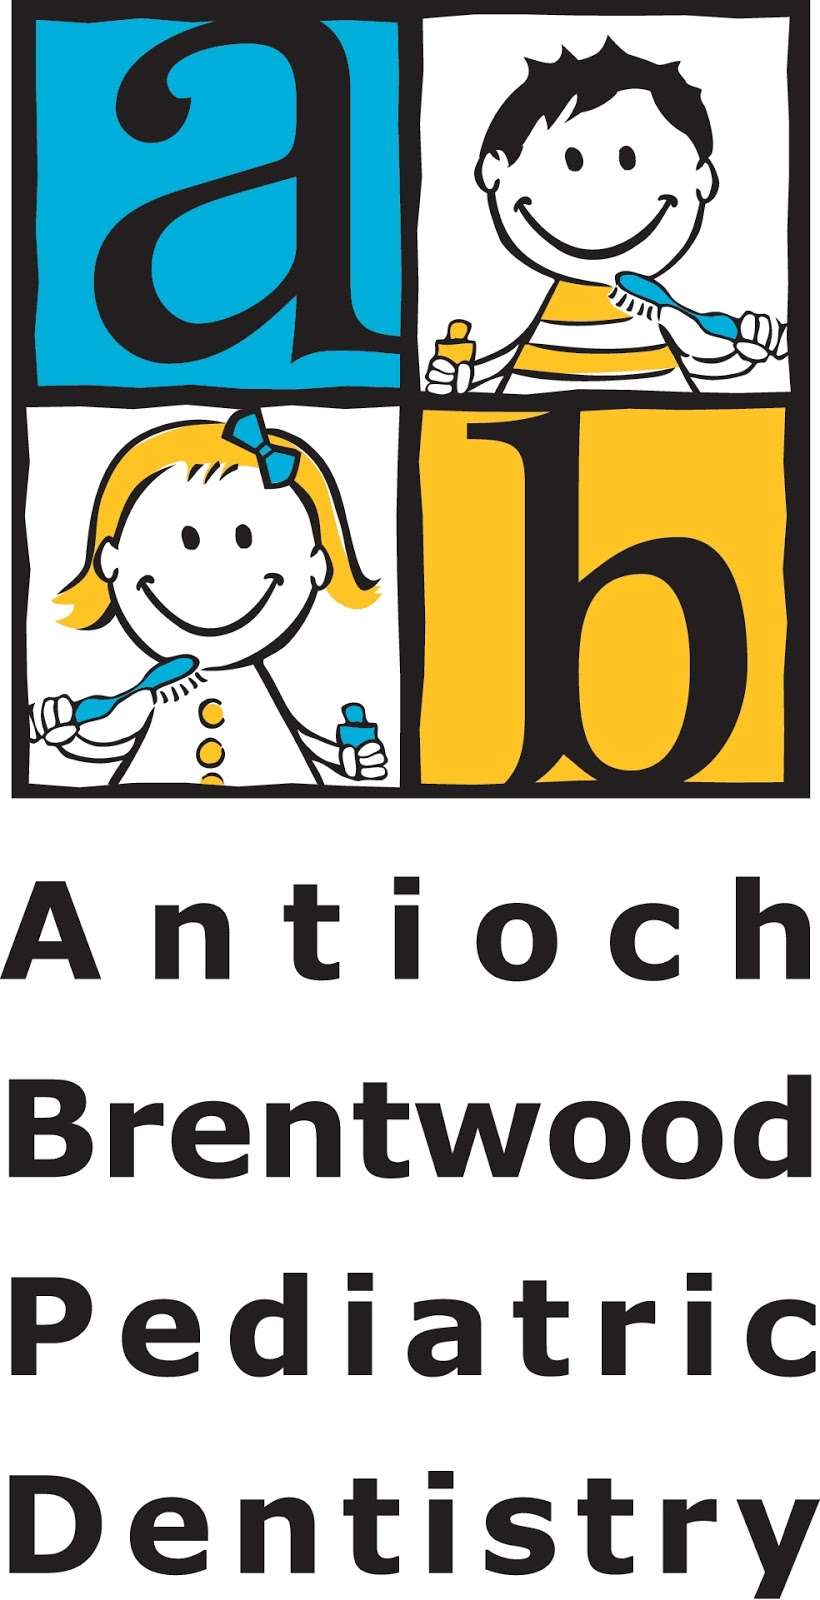 Antioch Brentwood Pediatric Dentistry | 7437, 2390 Country Hills Dr suite 102, Antioch, CA 94509, USA | Phone: (925) 757-4220